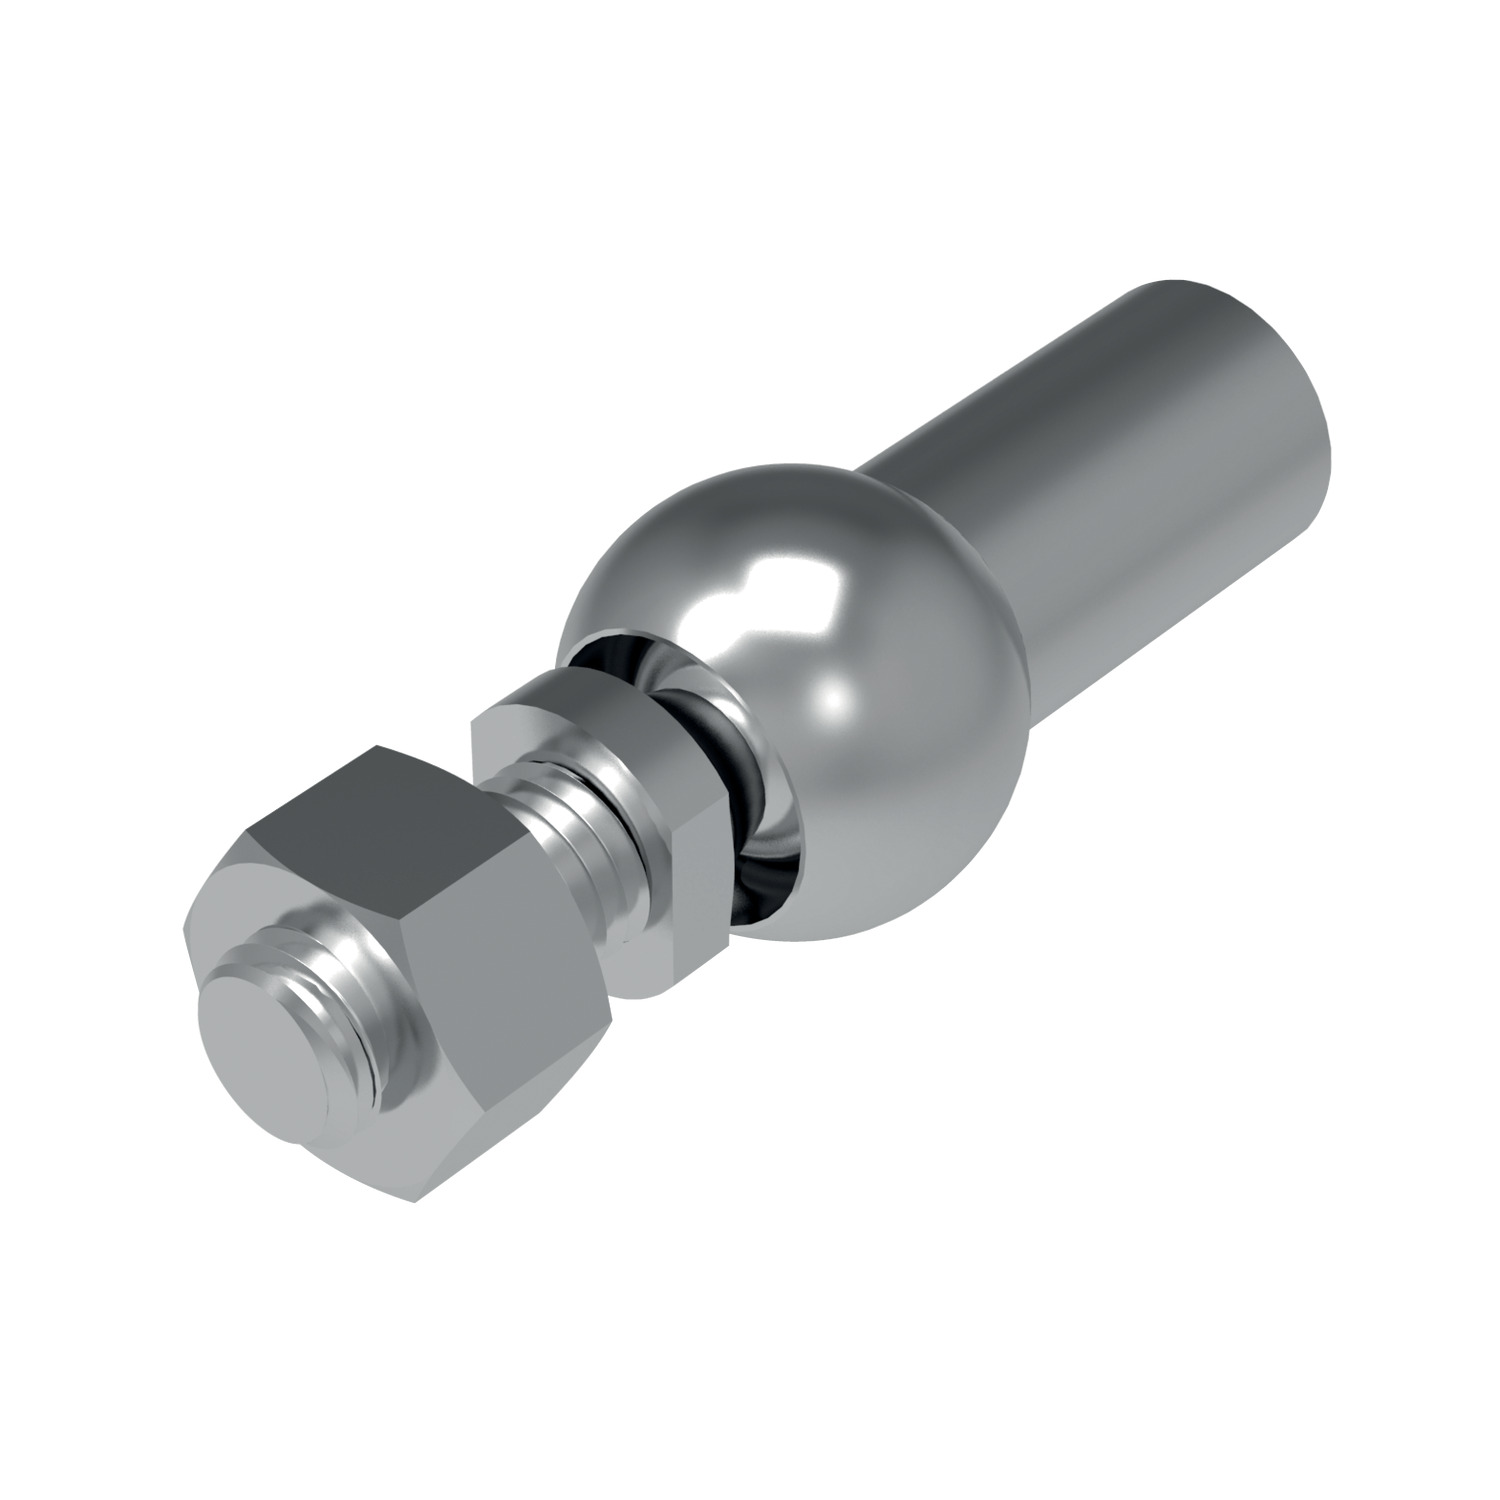 Product R3507, Stainless Axial Ball and Socket Joints left hand thread / 